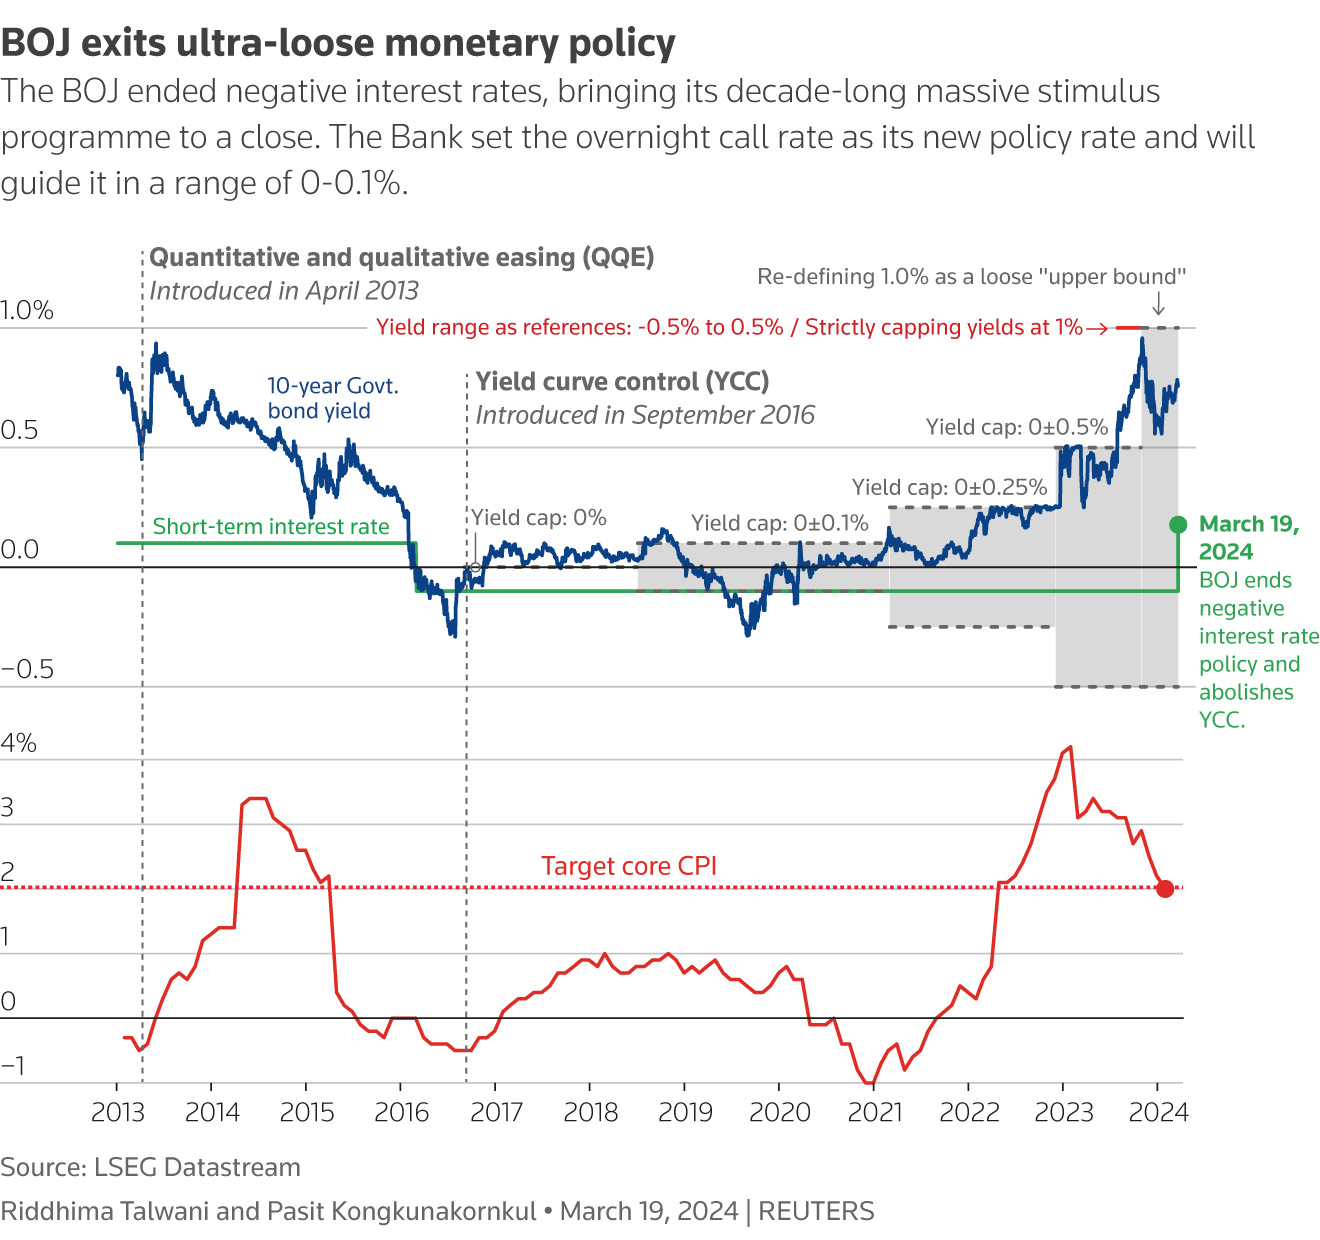 The BOJ ends negative interest rates in a landmark move that puts an end to its decade-long massive stimulus programme. The bank decided to guide it in a range of 0-0.1% partly by paying 0.1% interest to deposits at the central bank.